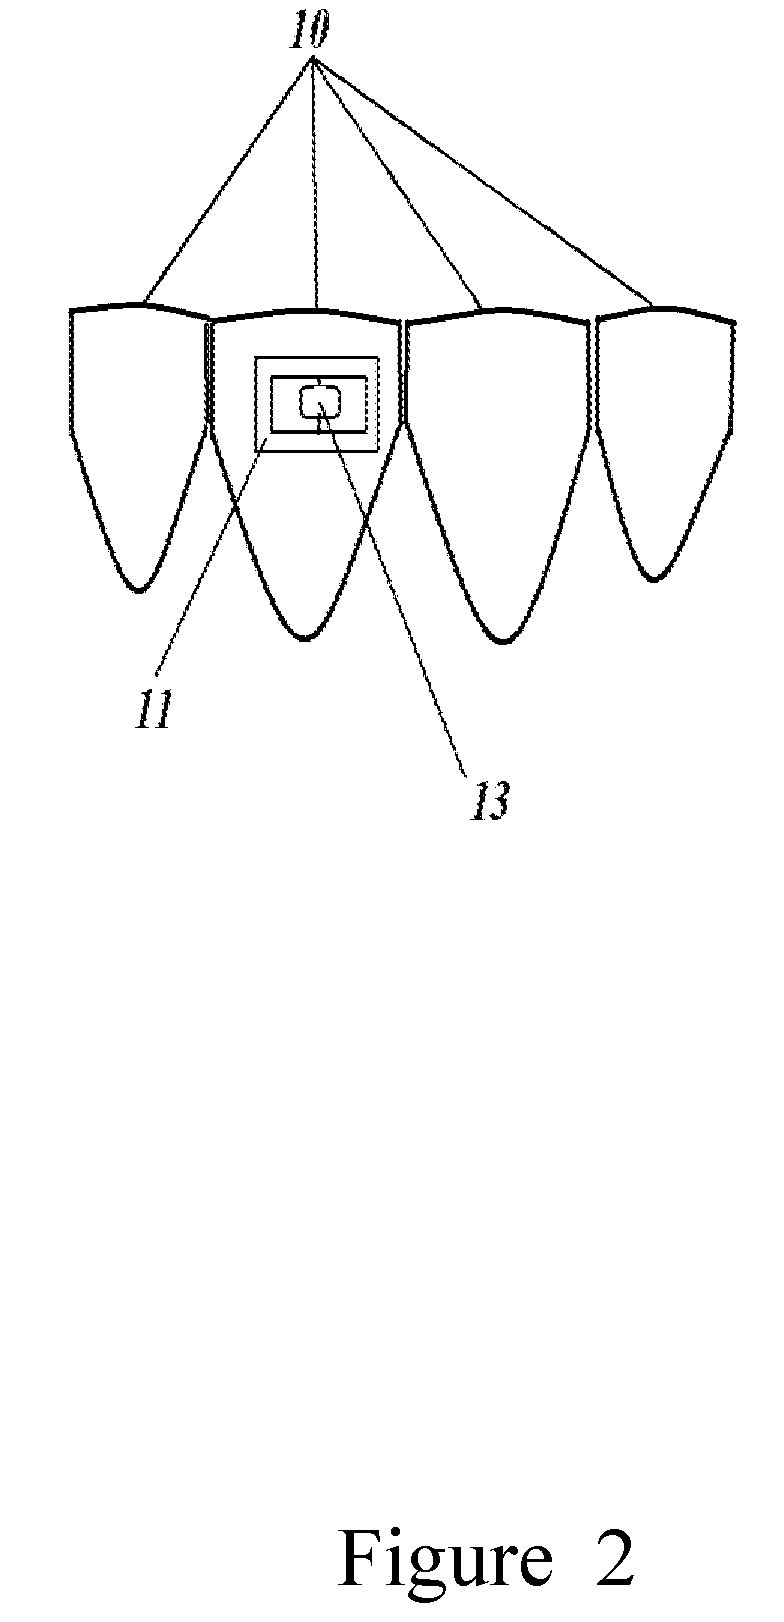 Method and Apparatus for Preventing Plaque, Calculus, and Hard Deposits in Body Cavities and the Mouth